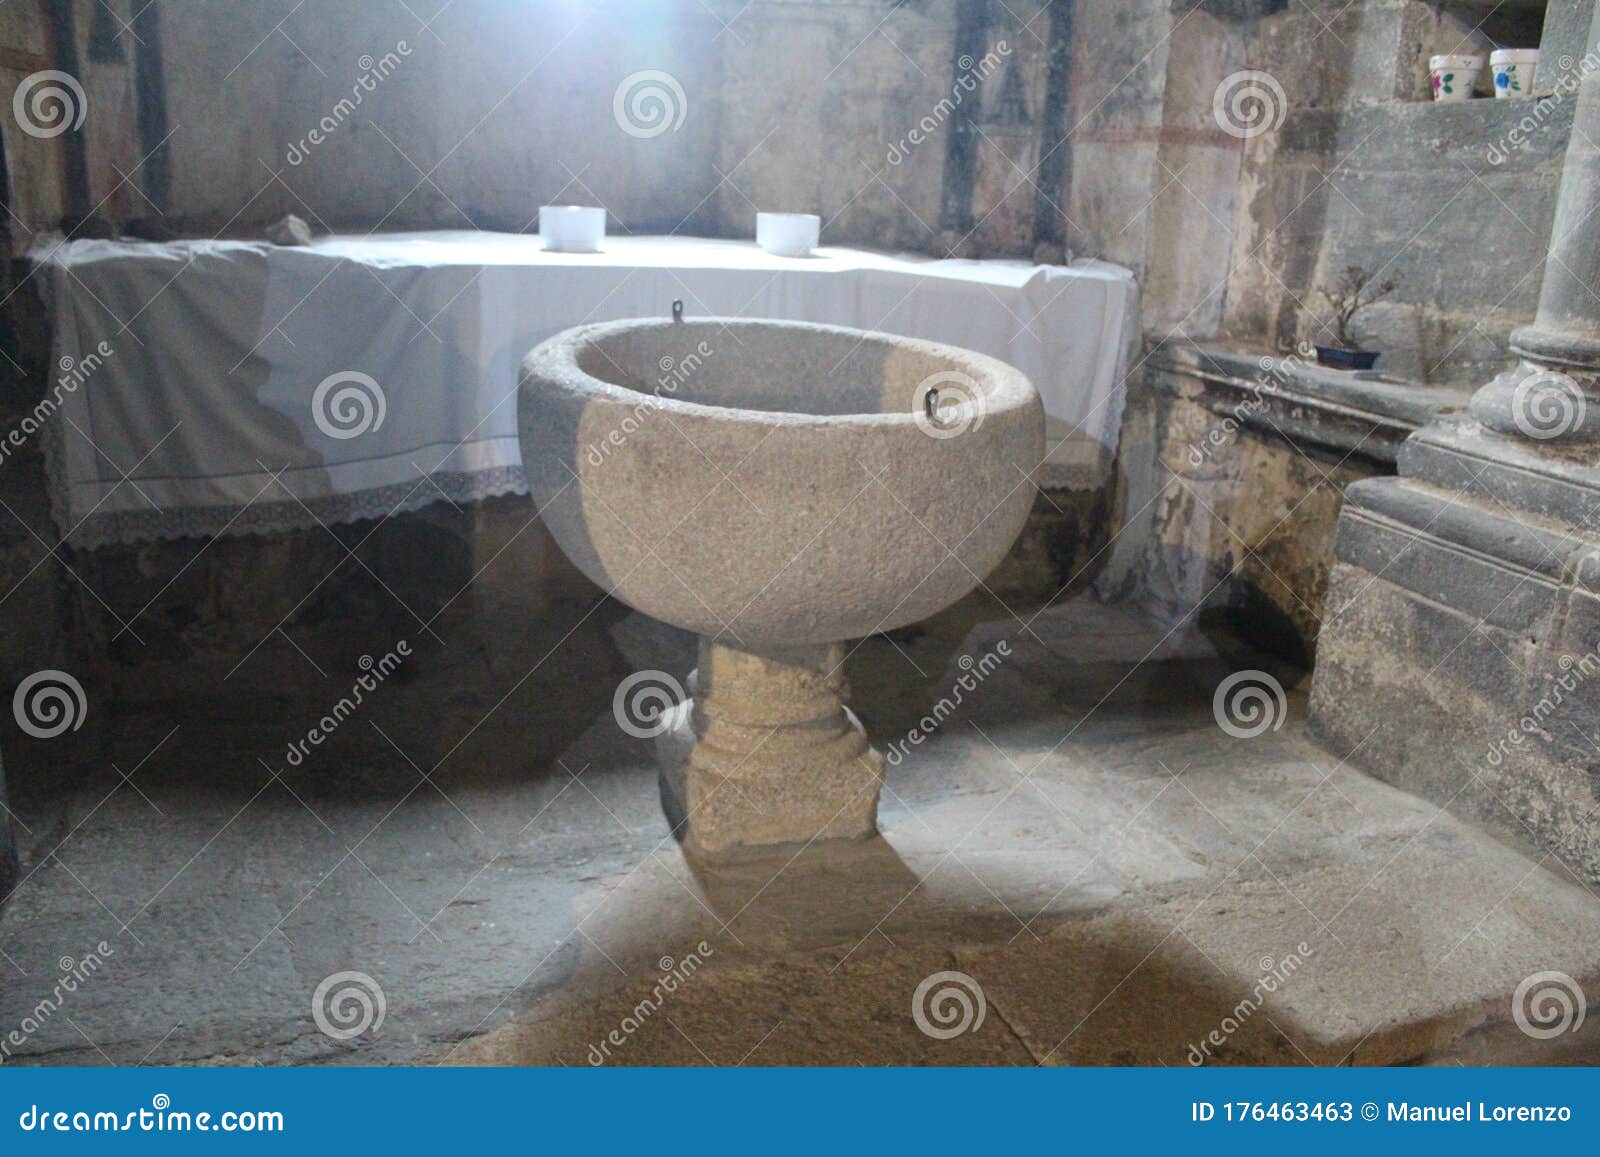 beautiful old stone baptismal font where it is converted to christianity